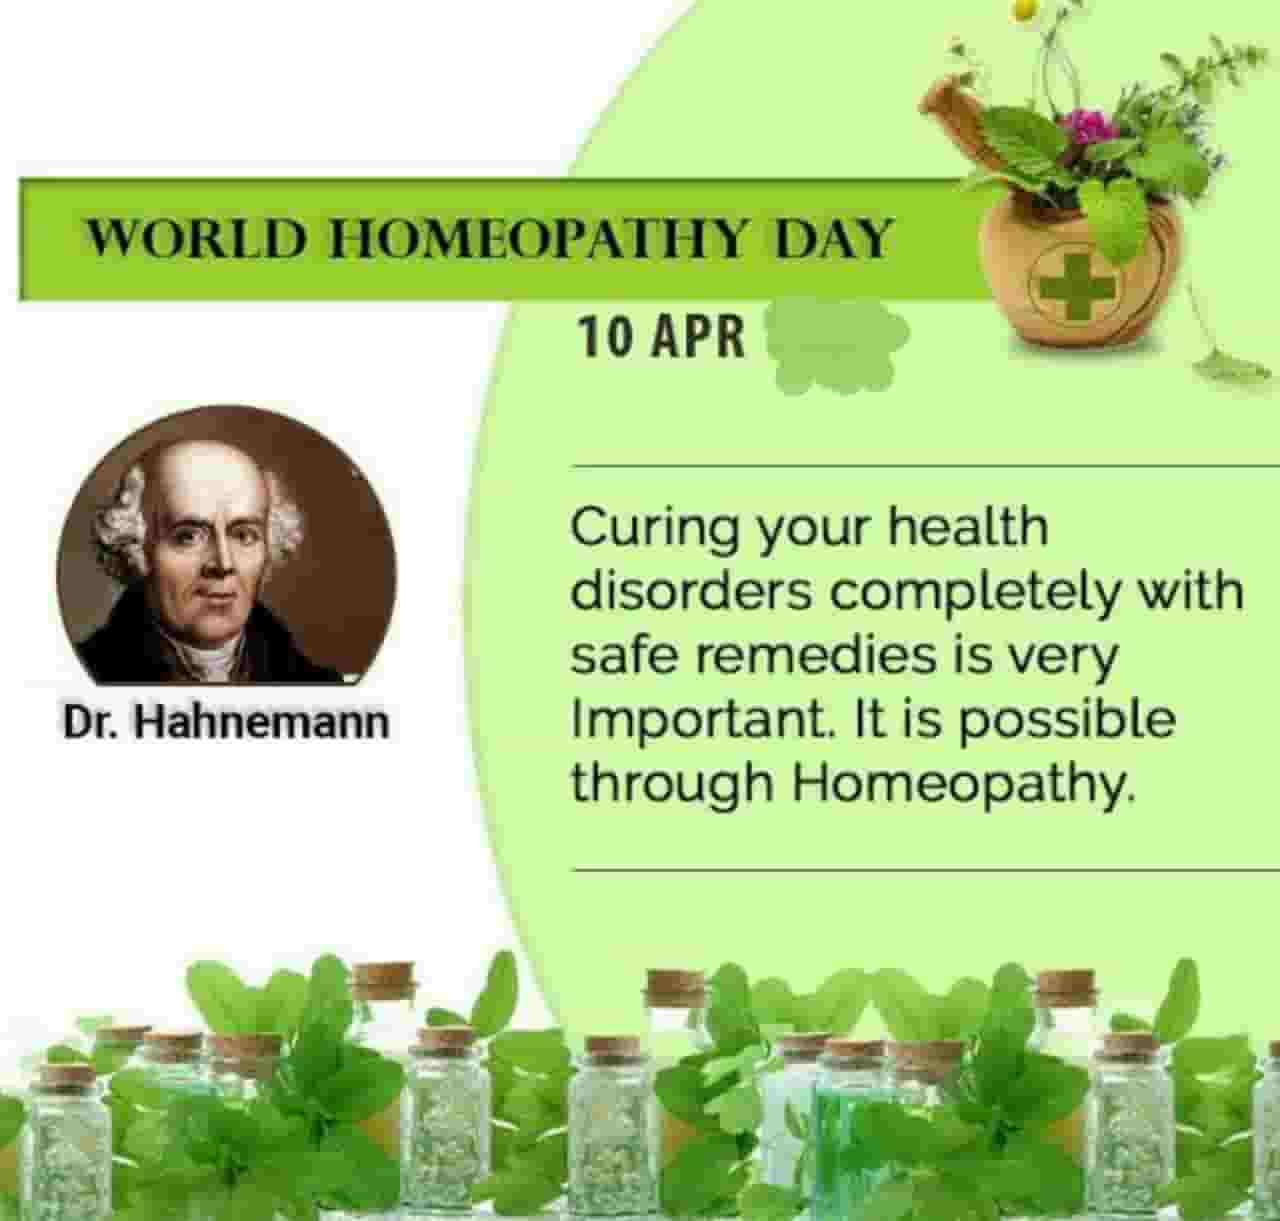 World Homeopathy Day - April 10